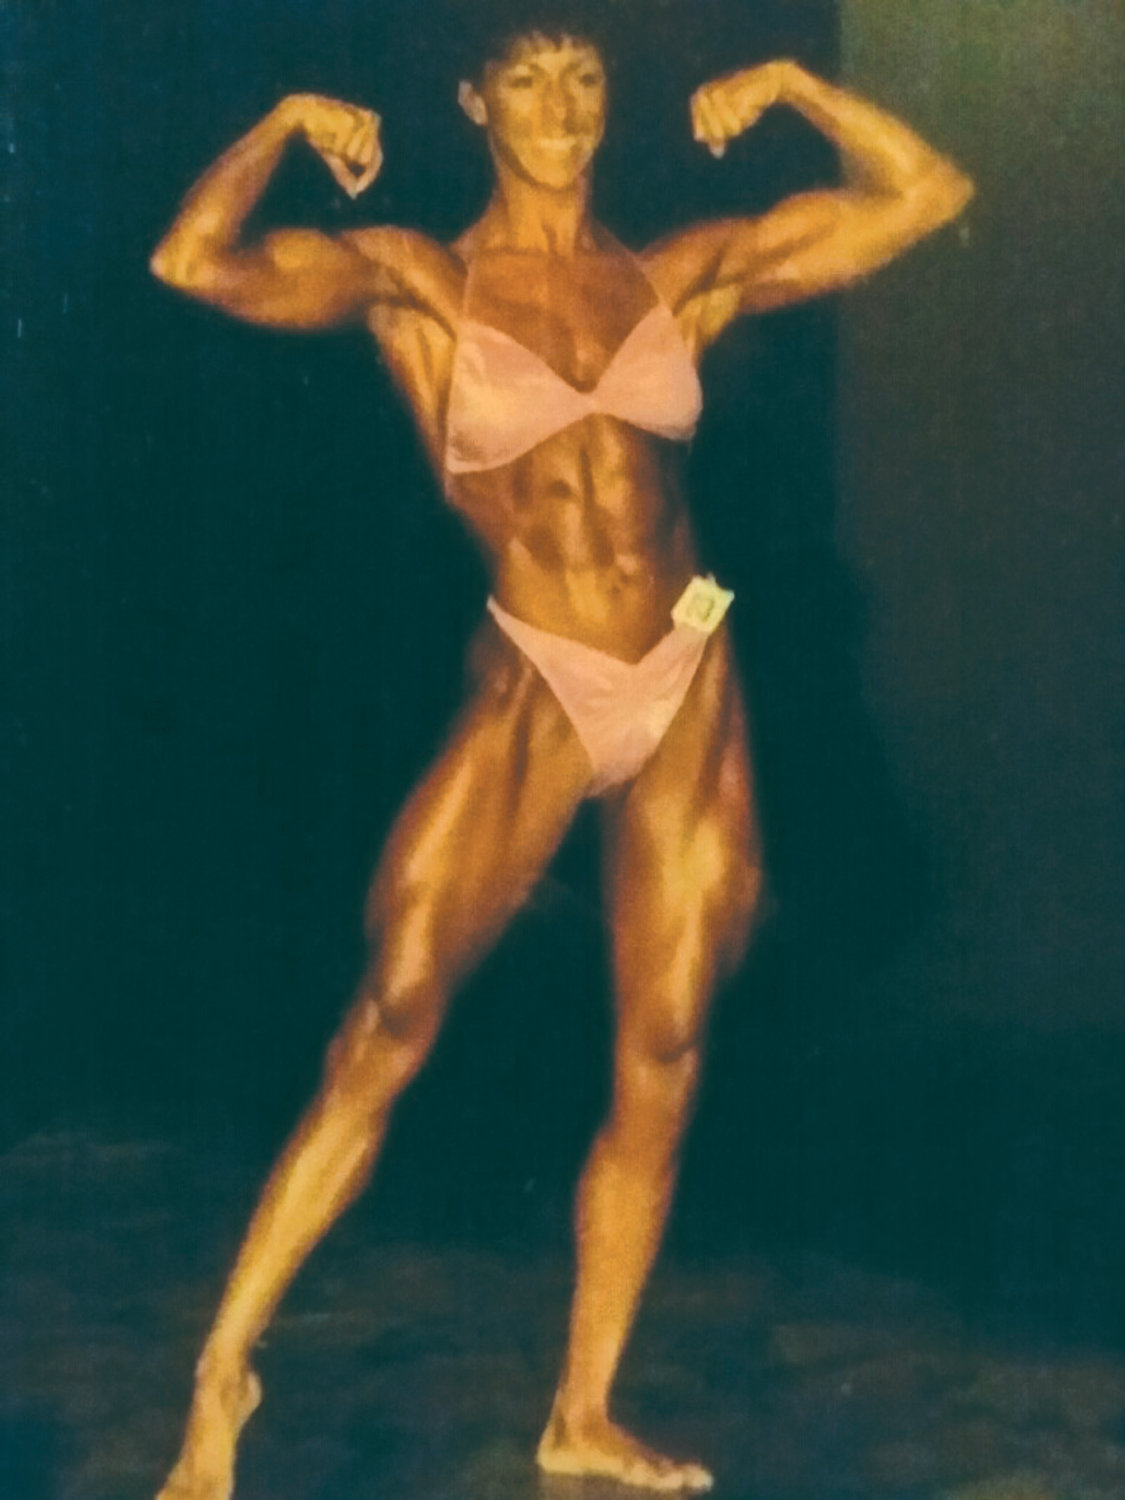 STAYING FIT: Sue Flesia competes in a body building competition.